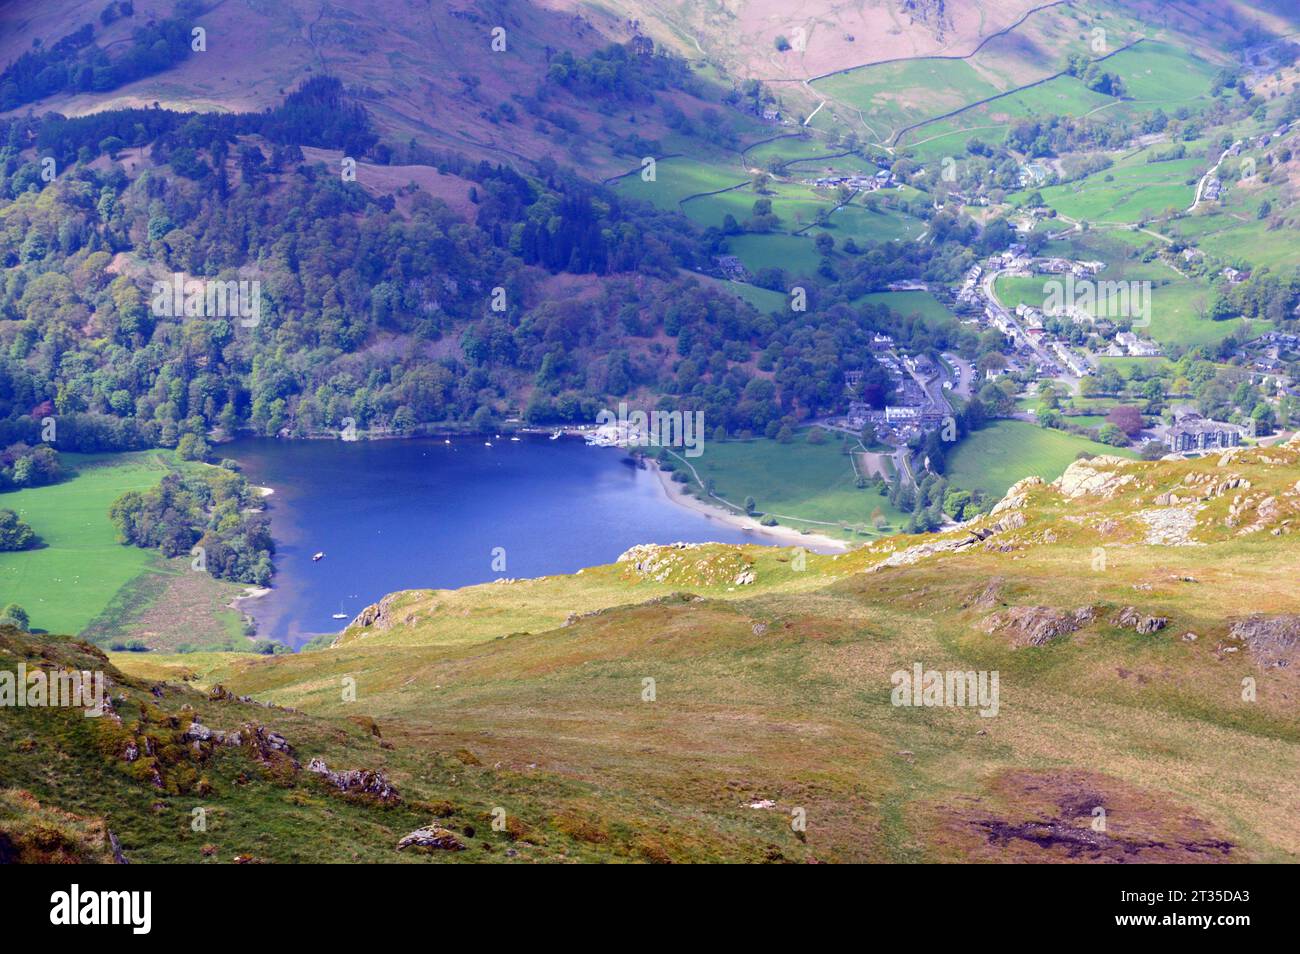 Ullswater Lake and the Glenridding Valley from near the Summit of 'Place Fell' in the Lake District National Park, Cumbria, England, UK Stock Photo